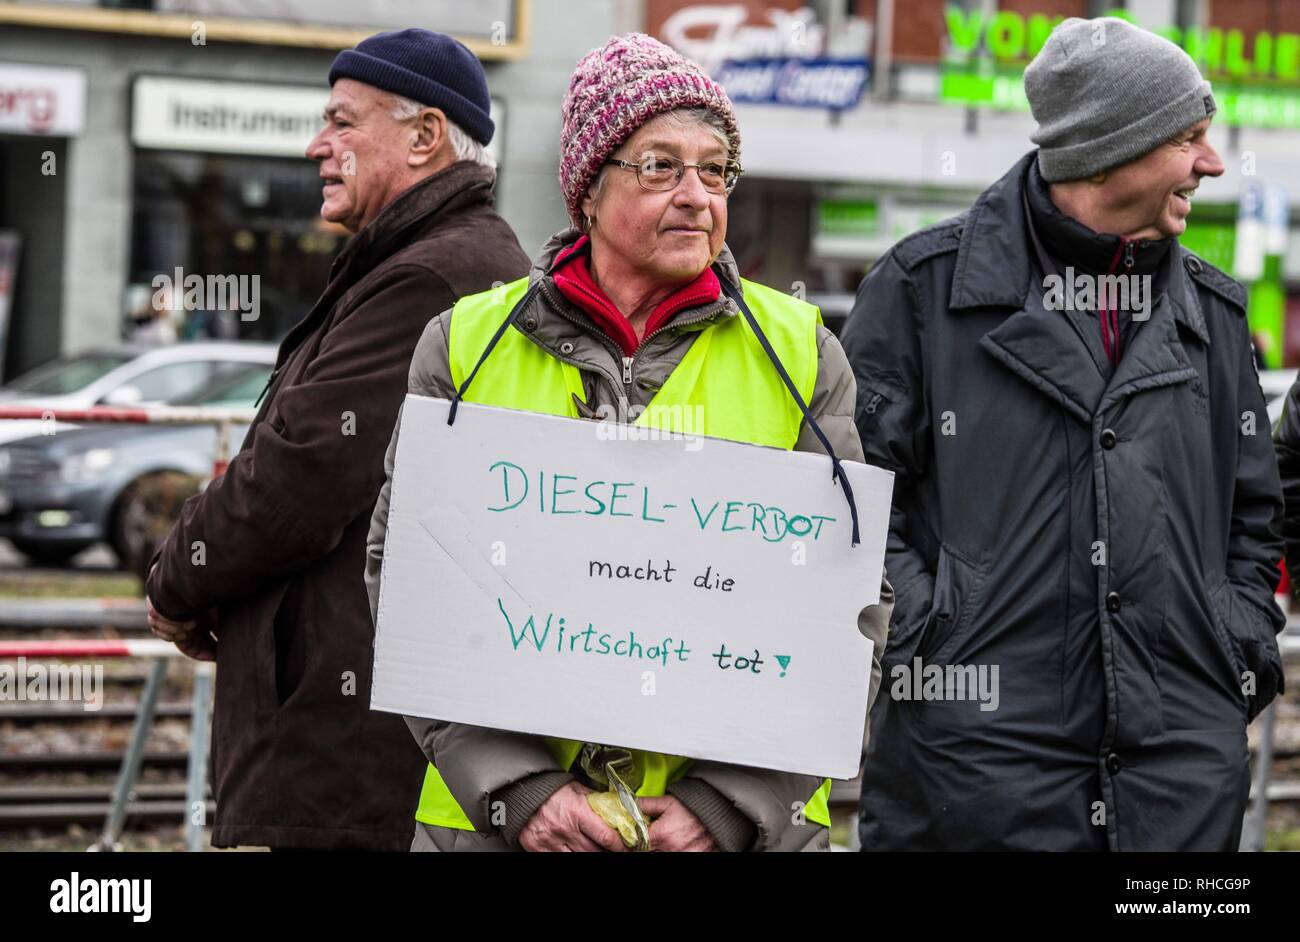 Munich, Bavaria, Germany. 2nd Feb, 2019. ''Diesel bans kills the economy''. Responding to the prospect of diesel auto bans in major cities in Germany, protestors assembled at an air quality monitoring station in Munich's city center.  Stock Photo